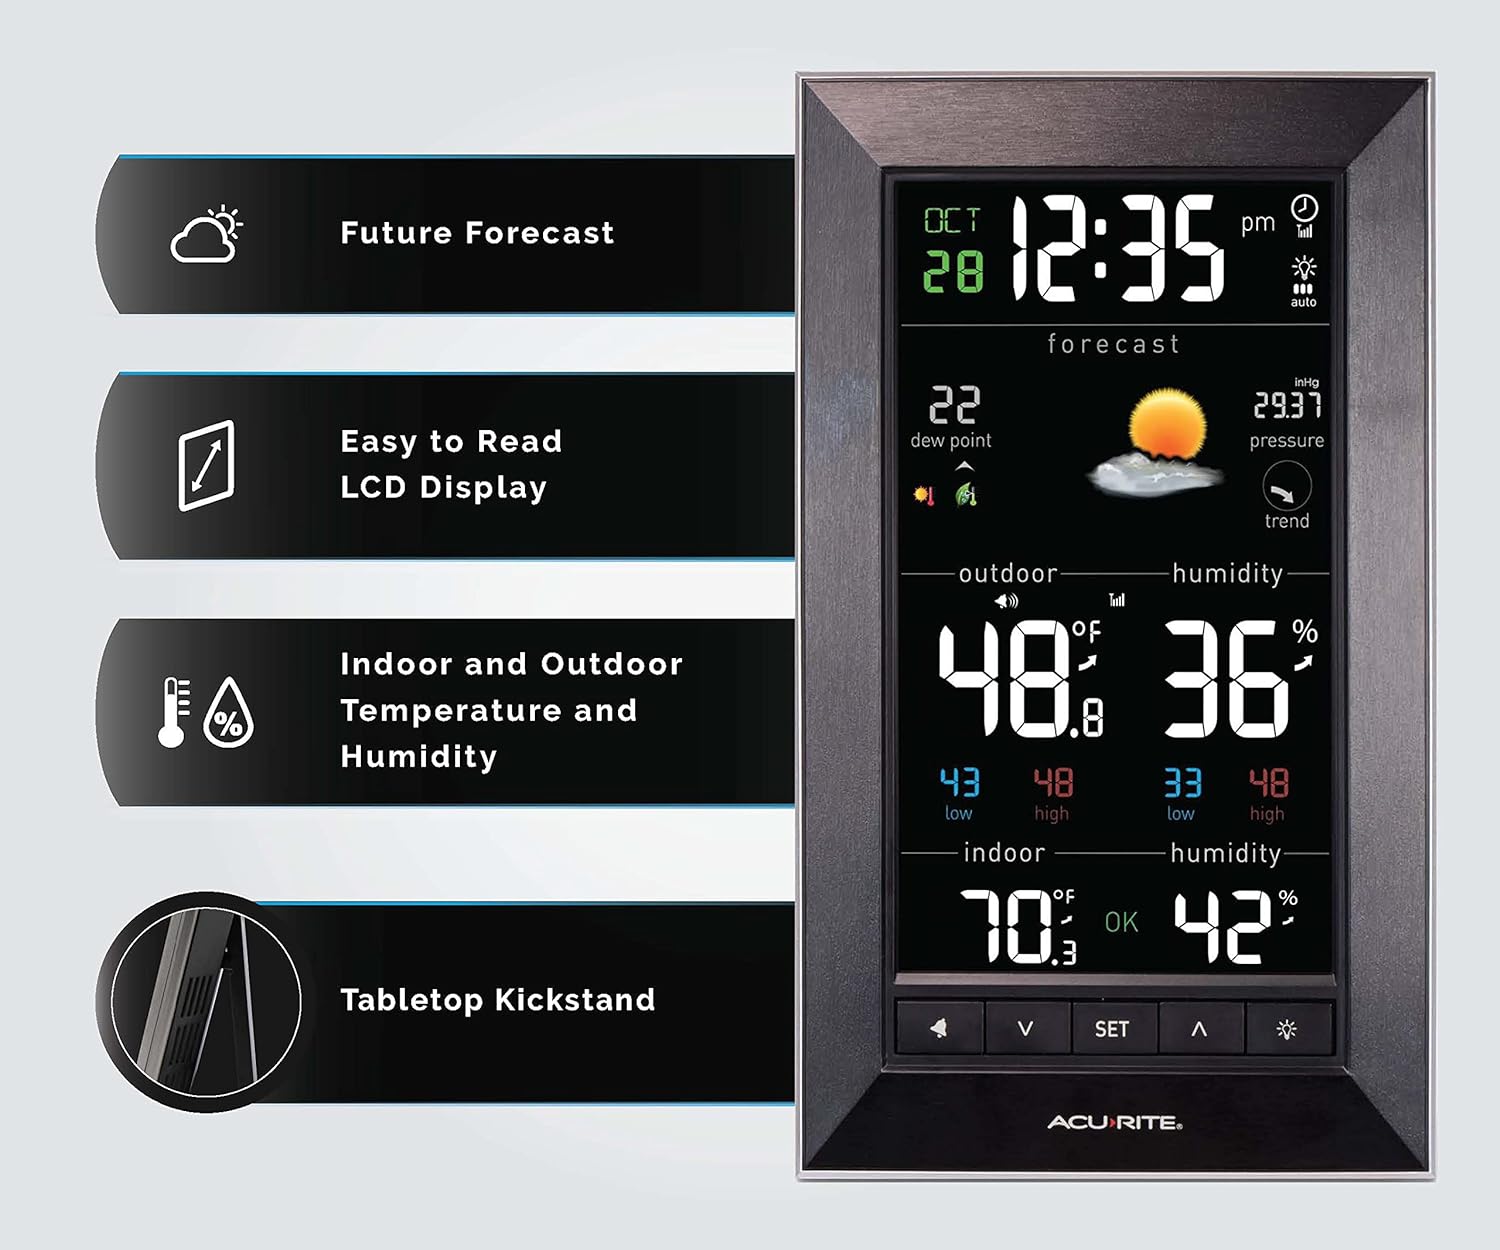 AcuRite 01121M Vertical Wireless Color Weather Station (Dark Theme) with Temperature Alerts